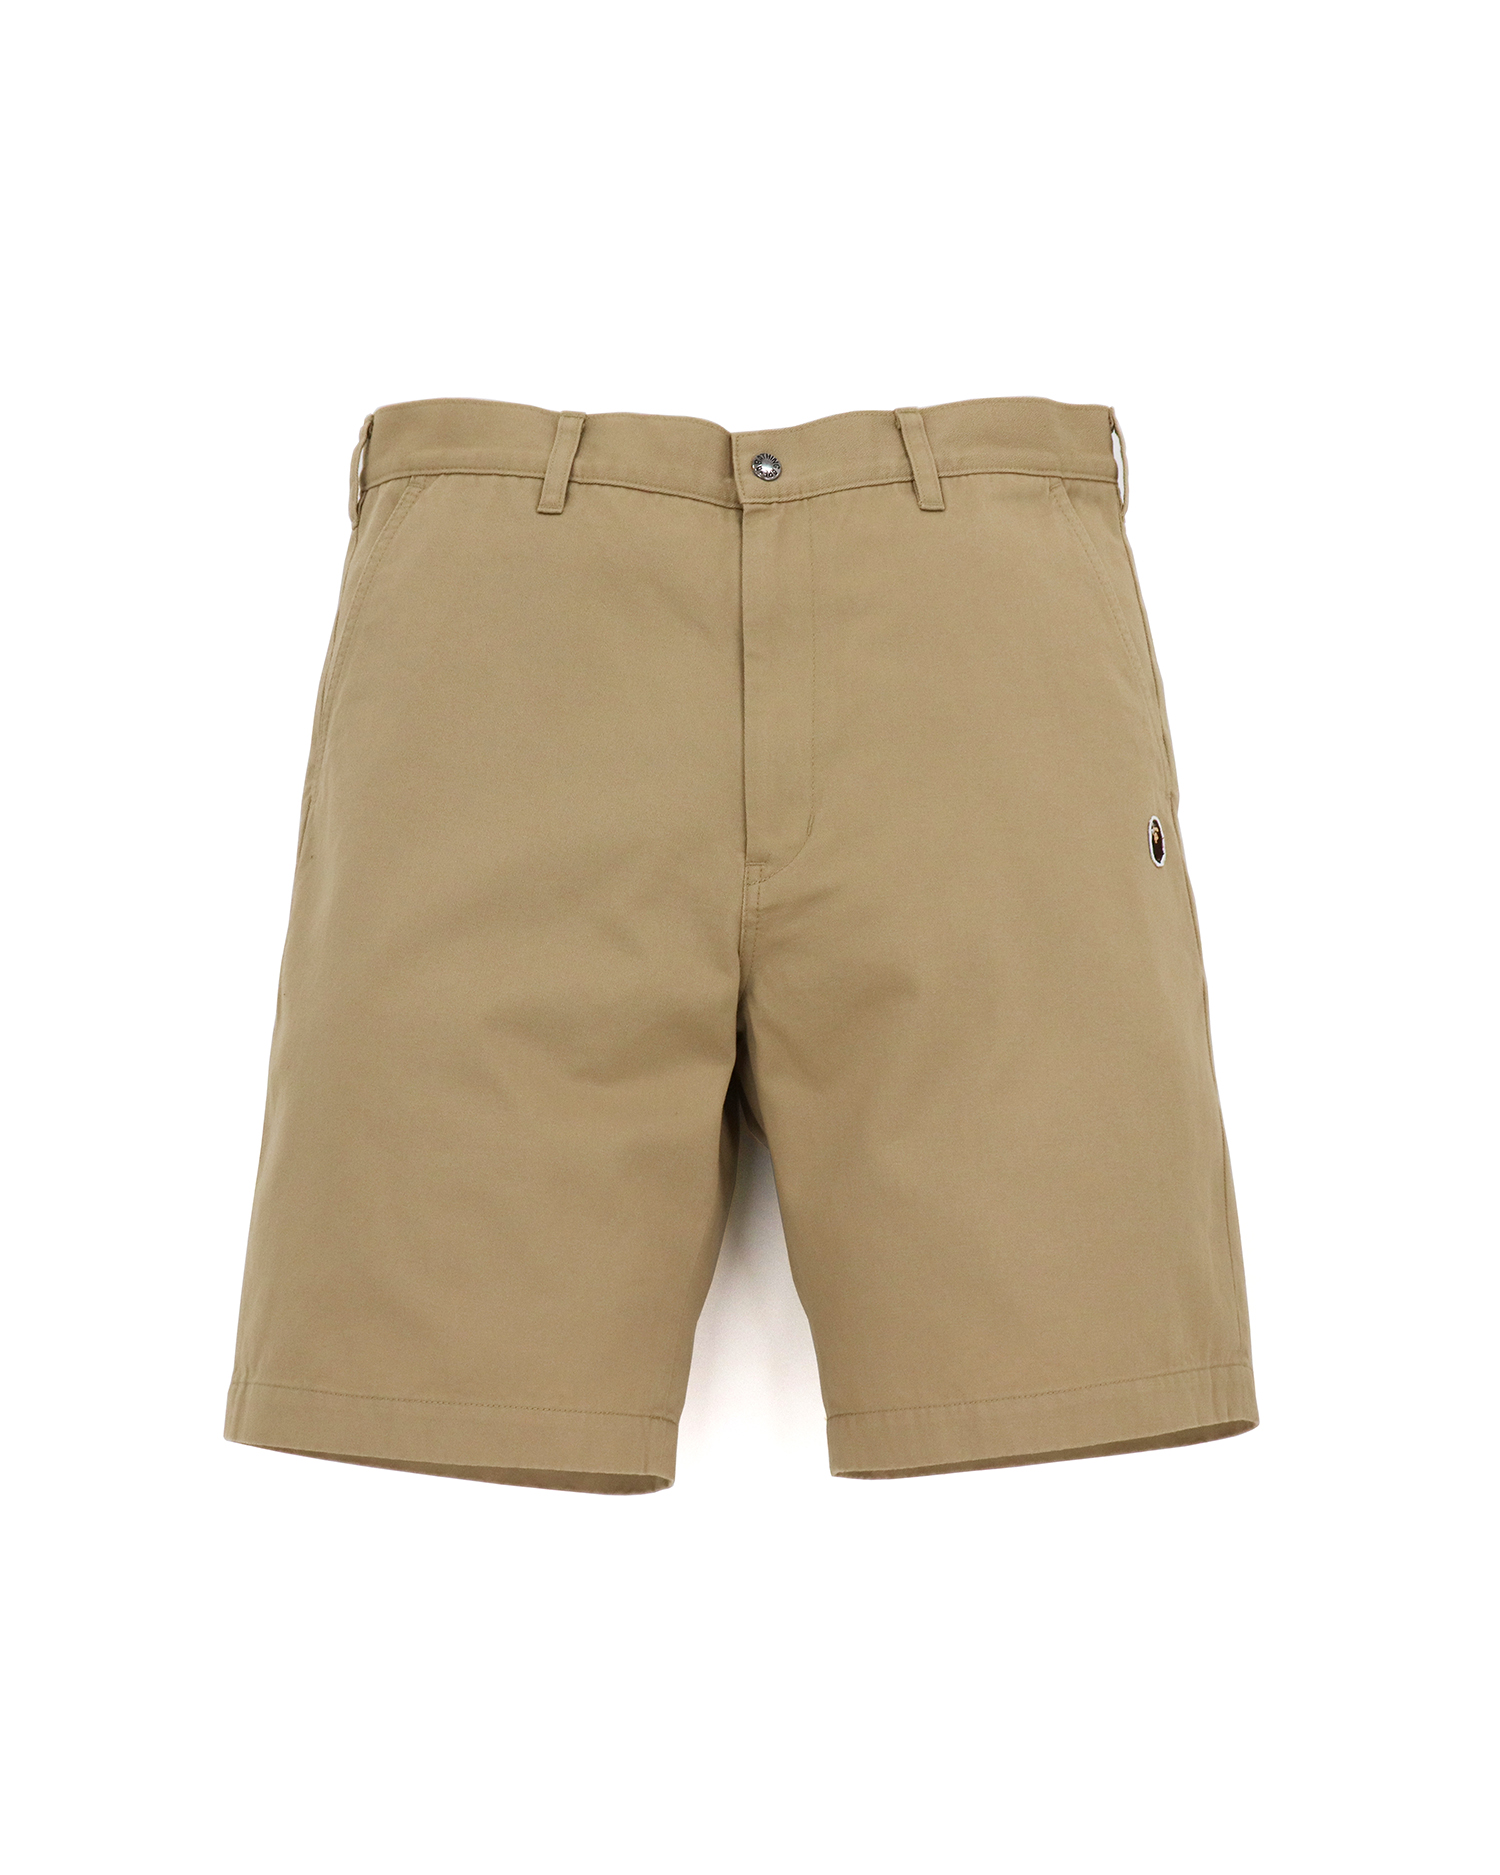 Shop One Point Chino Shorts Online | BAPE